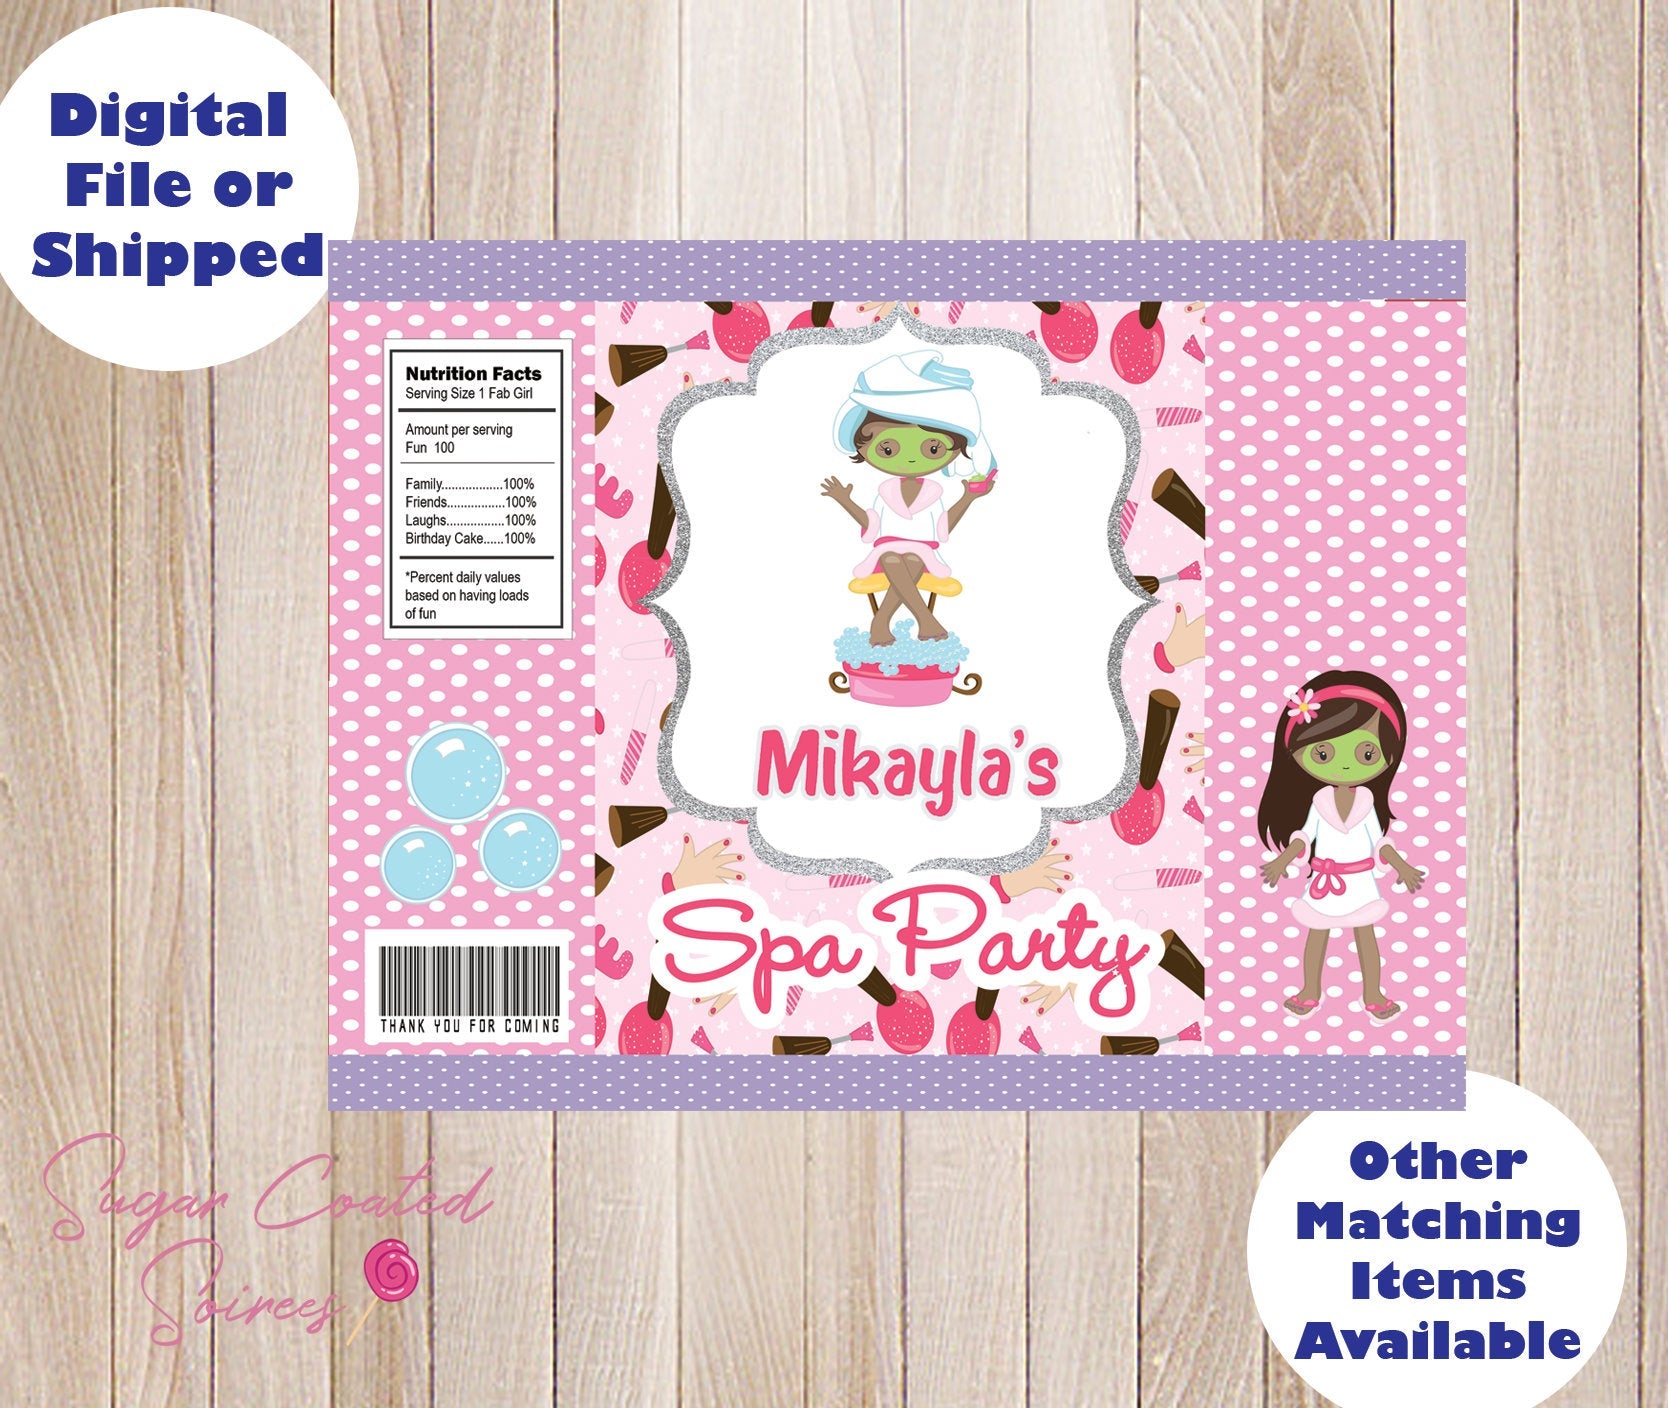 SHIPPED PRINTED Spa Girls Makeup Beauty Party African American Birthday chip / treat / party / favor / goodie / candy bag